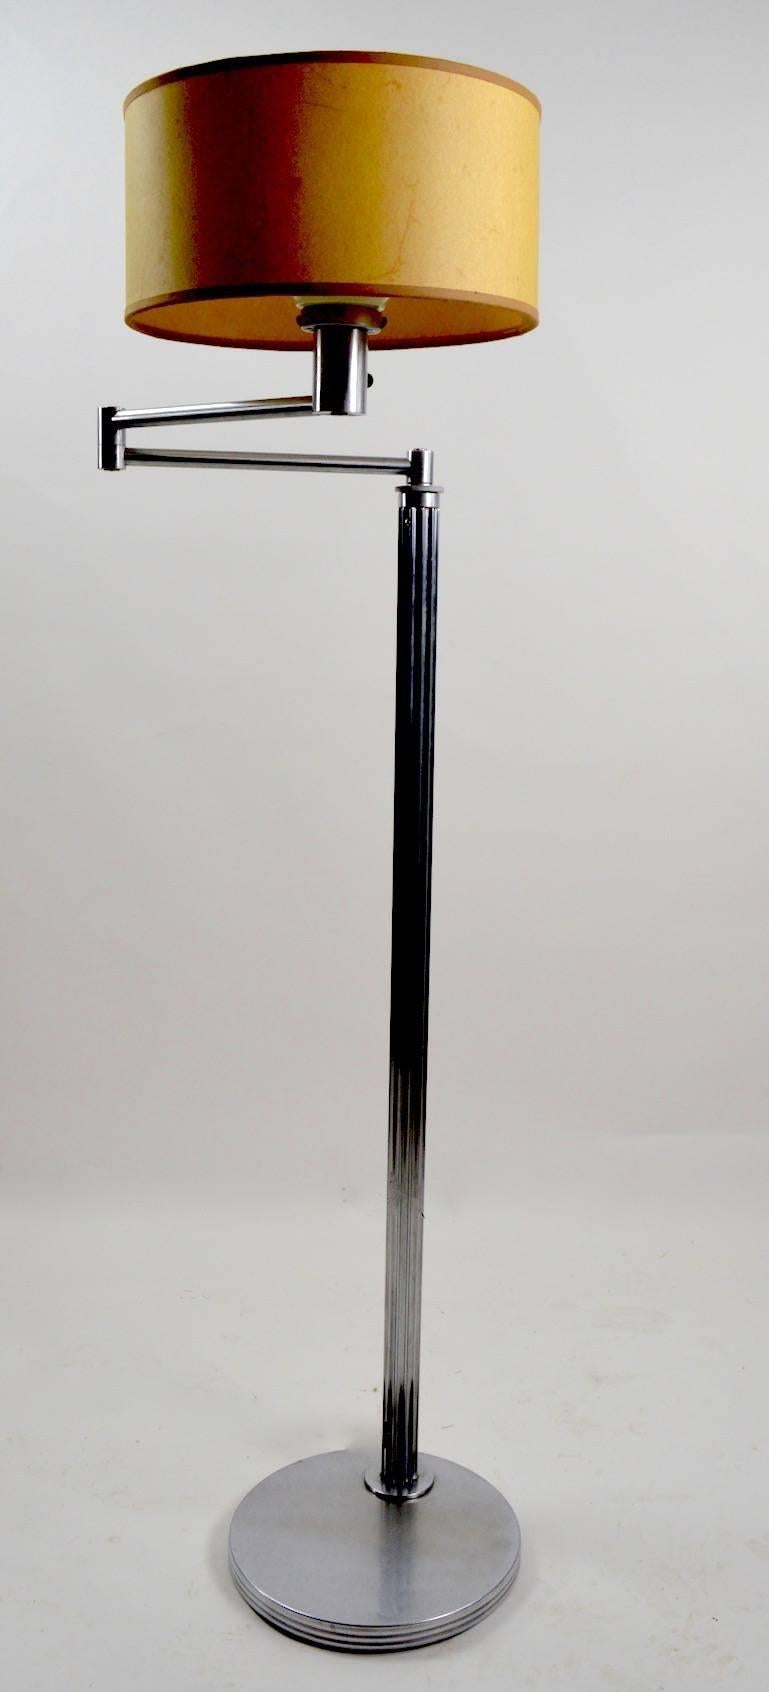 Early and rare version of the now iconic  Machine Age Nessen swing arm floor lamp. The construction of this example dates the lamp from the 1930's (fluted column etc.), the lamp is signed Nessen Studios on the base. Each arm is approximately 12